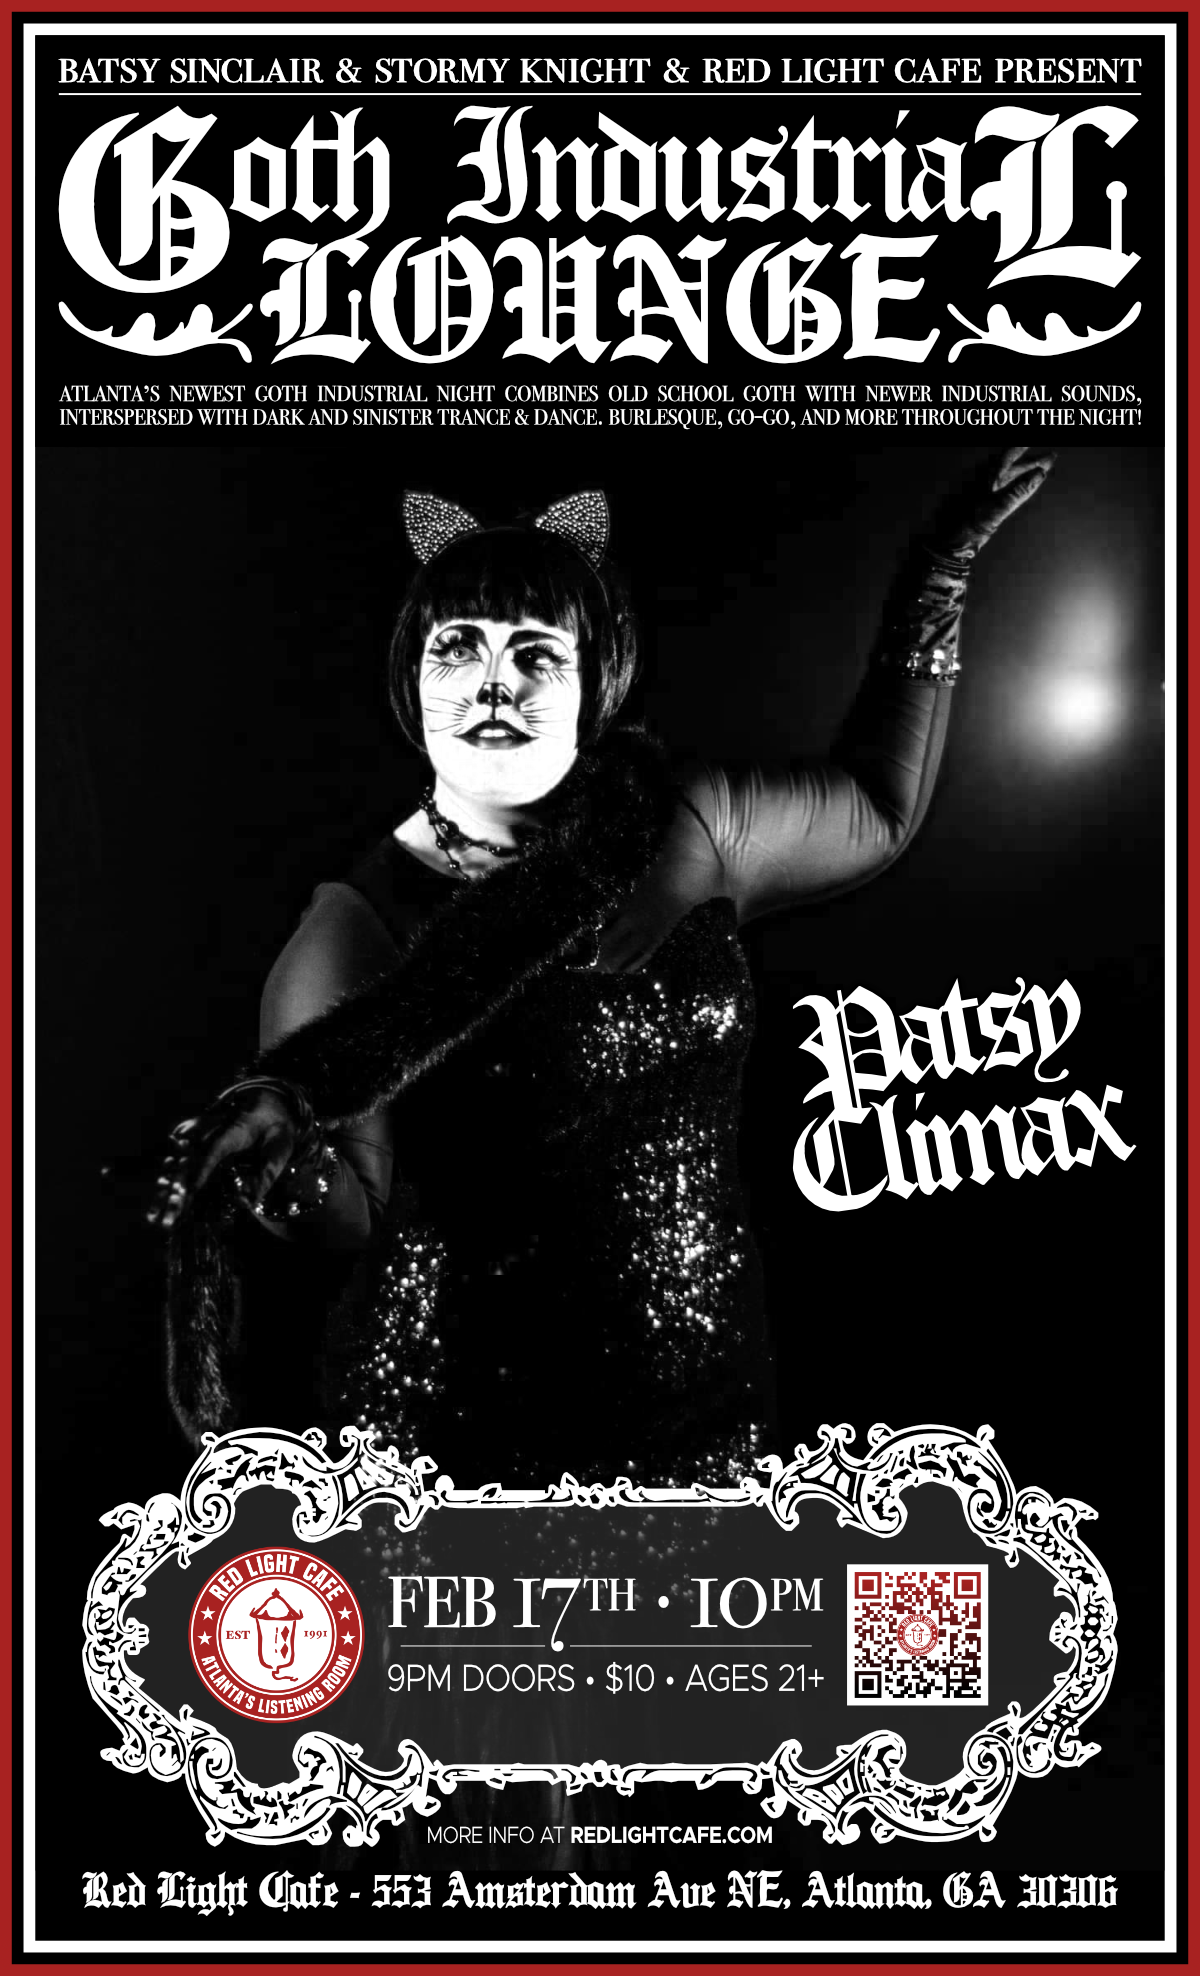 Goth Industrial Lounge feat. Patsy Climax — February 17, 2023 — Red Light Café, Atlanta, GA